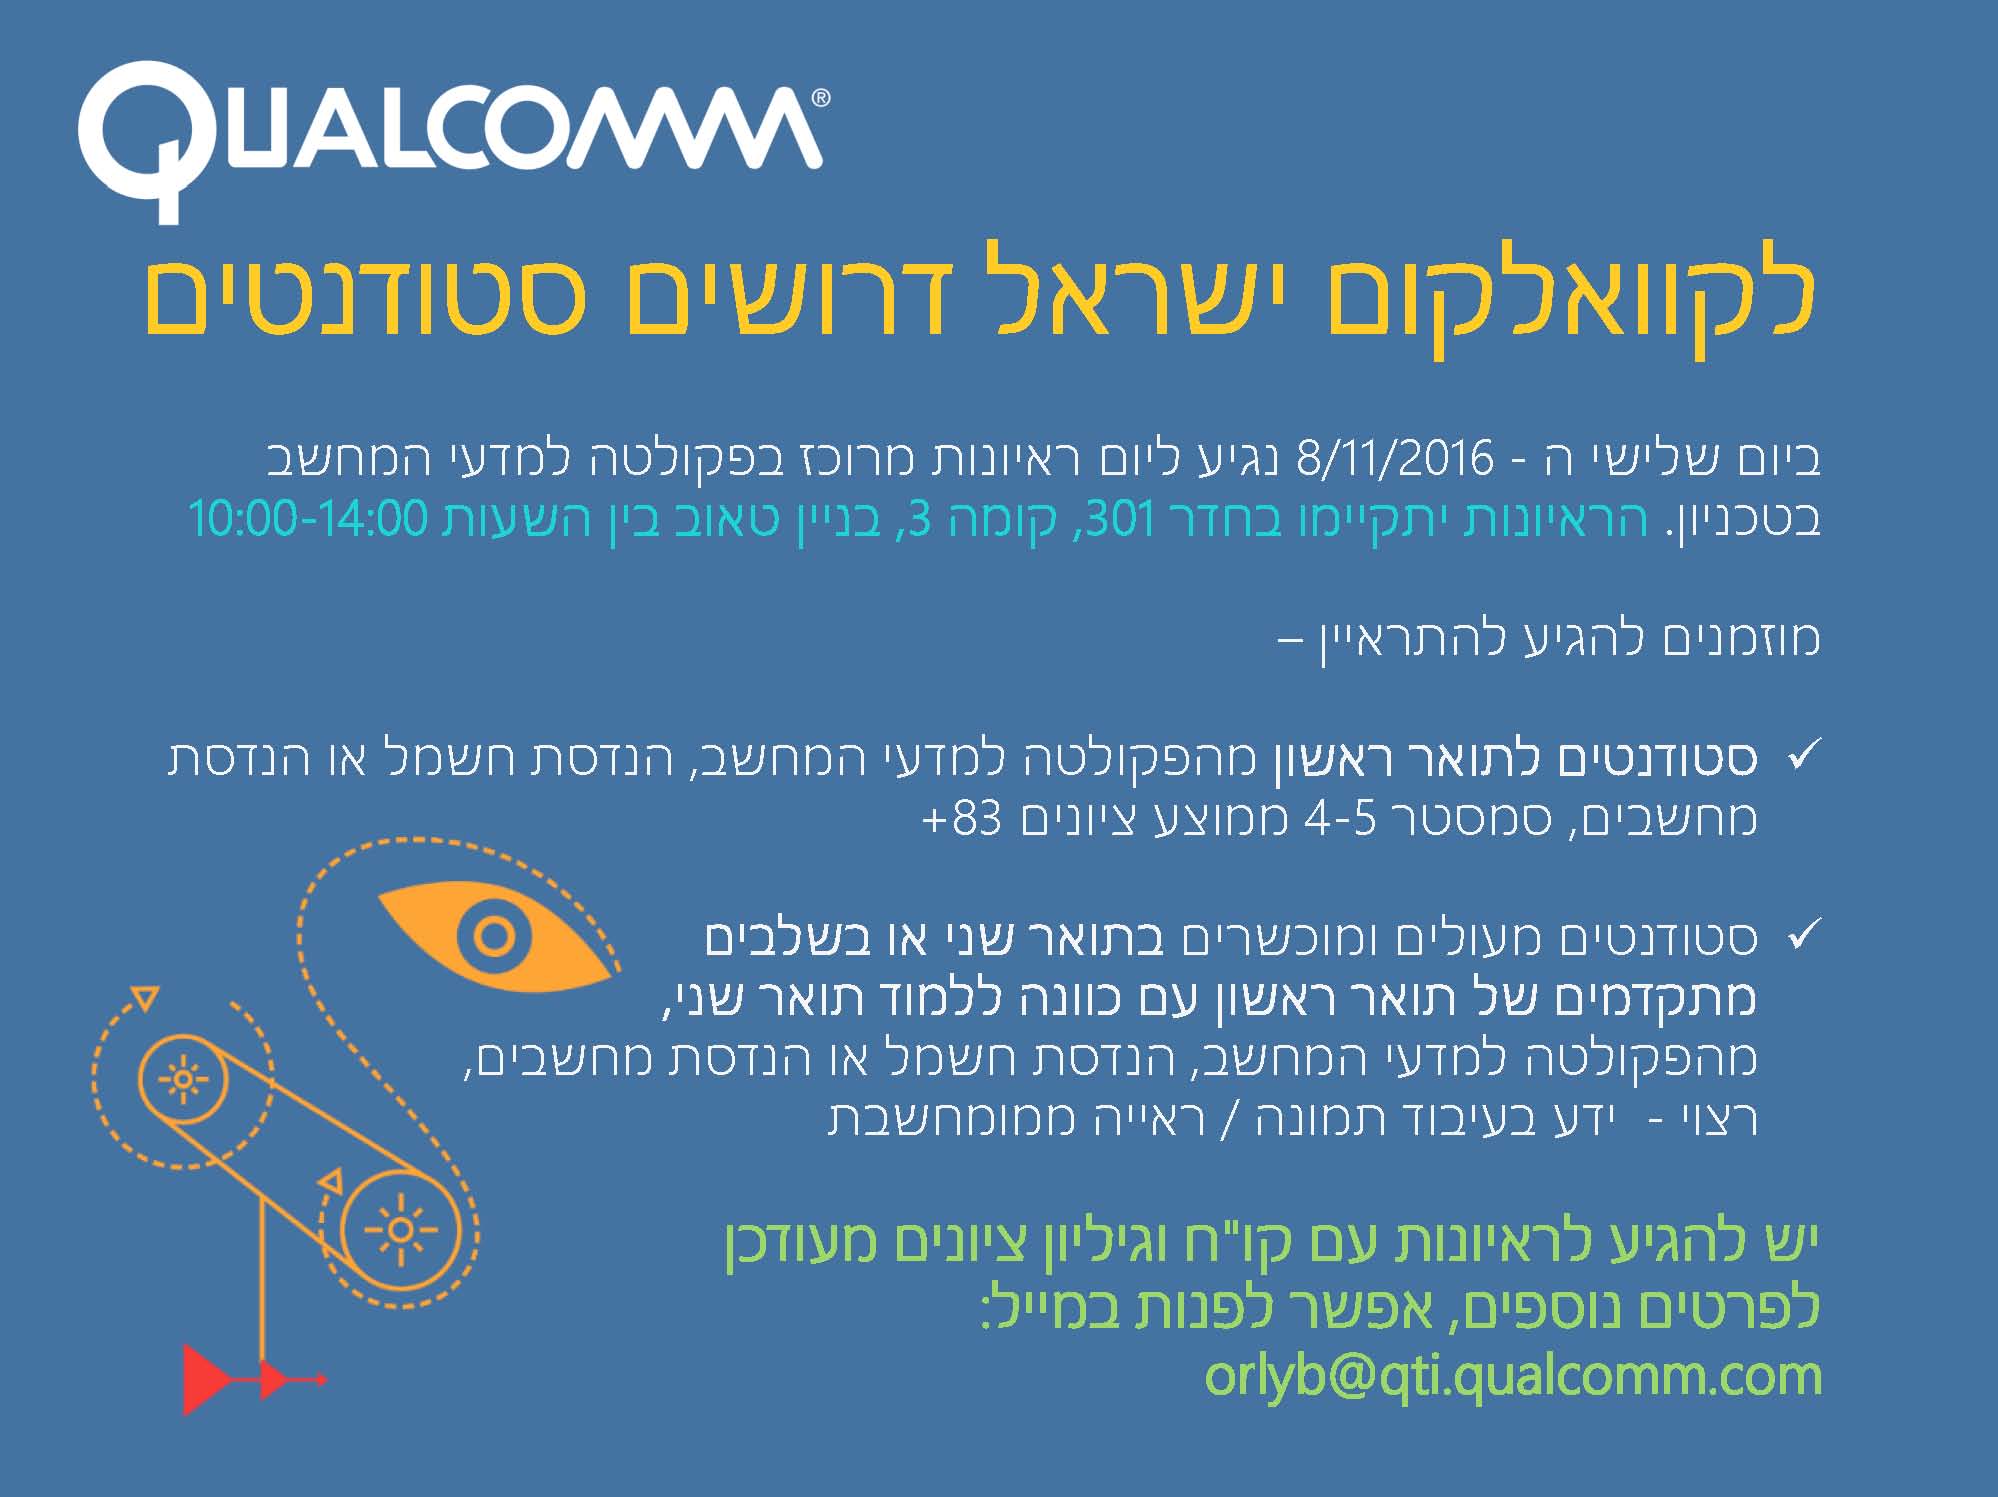 Interview Event by Qualcomm